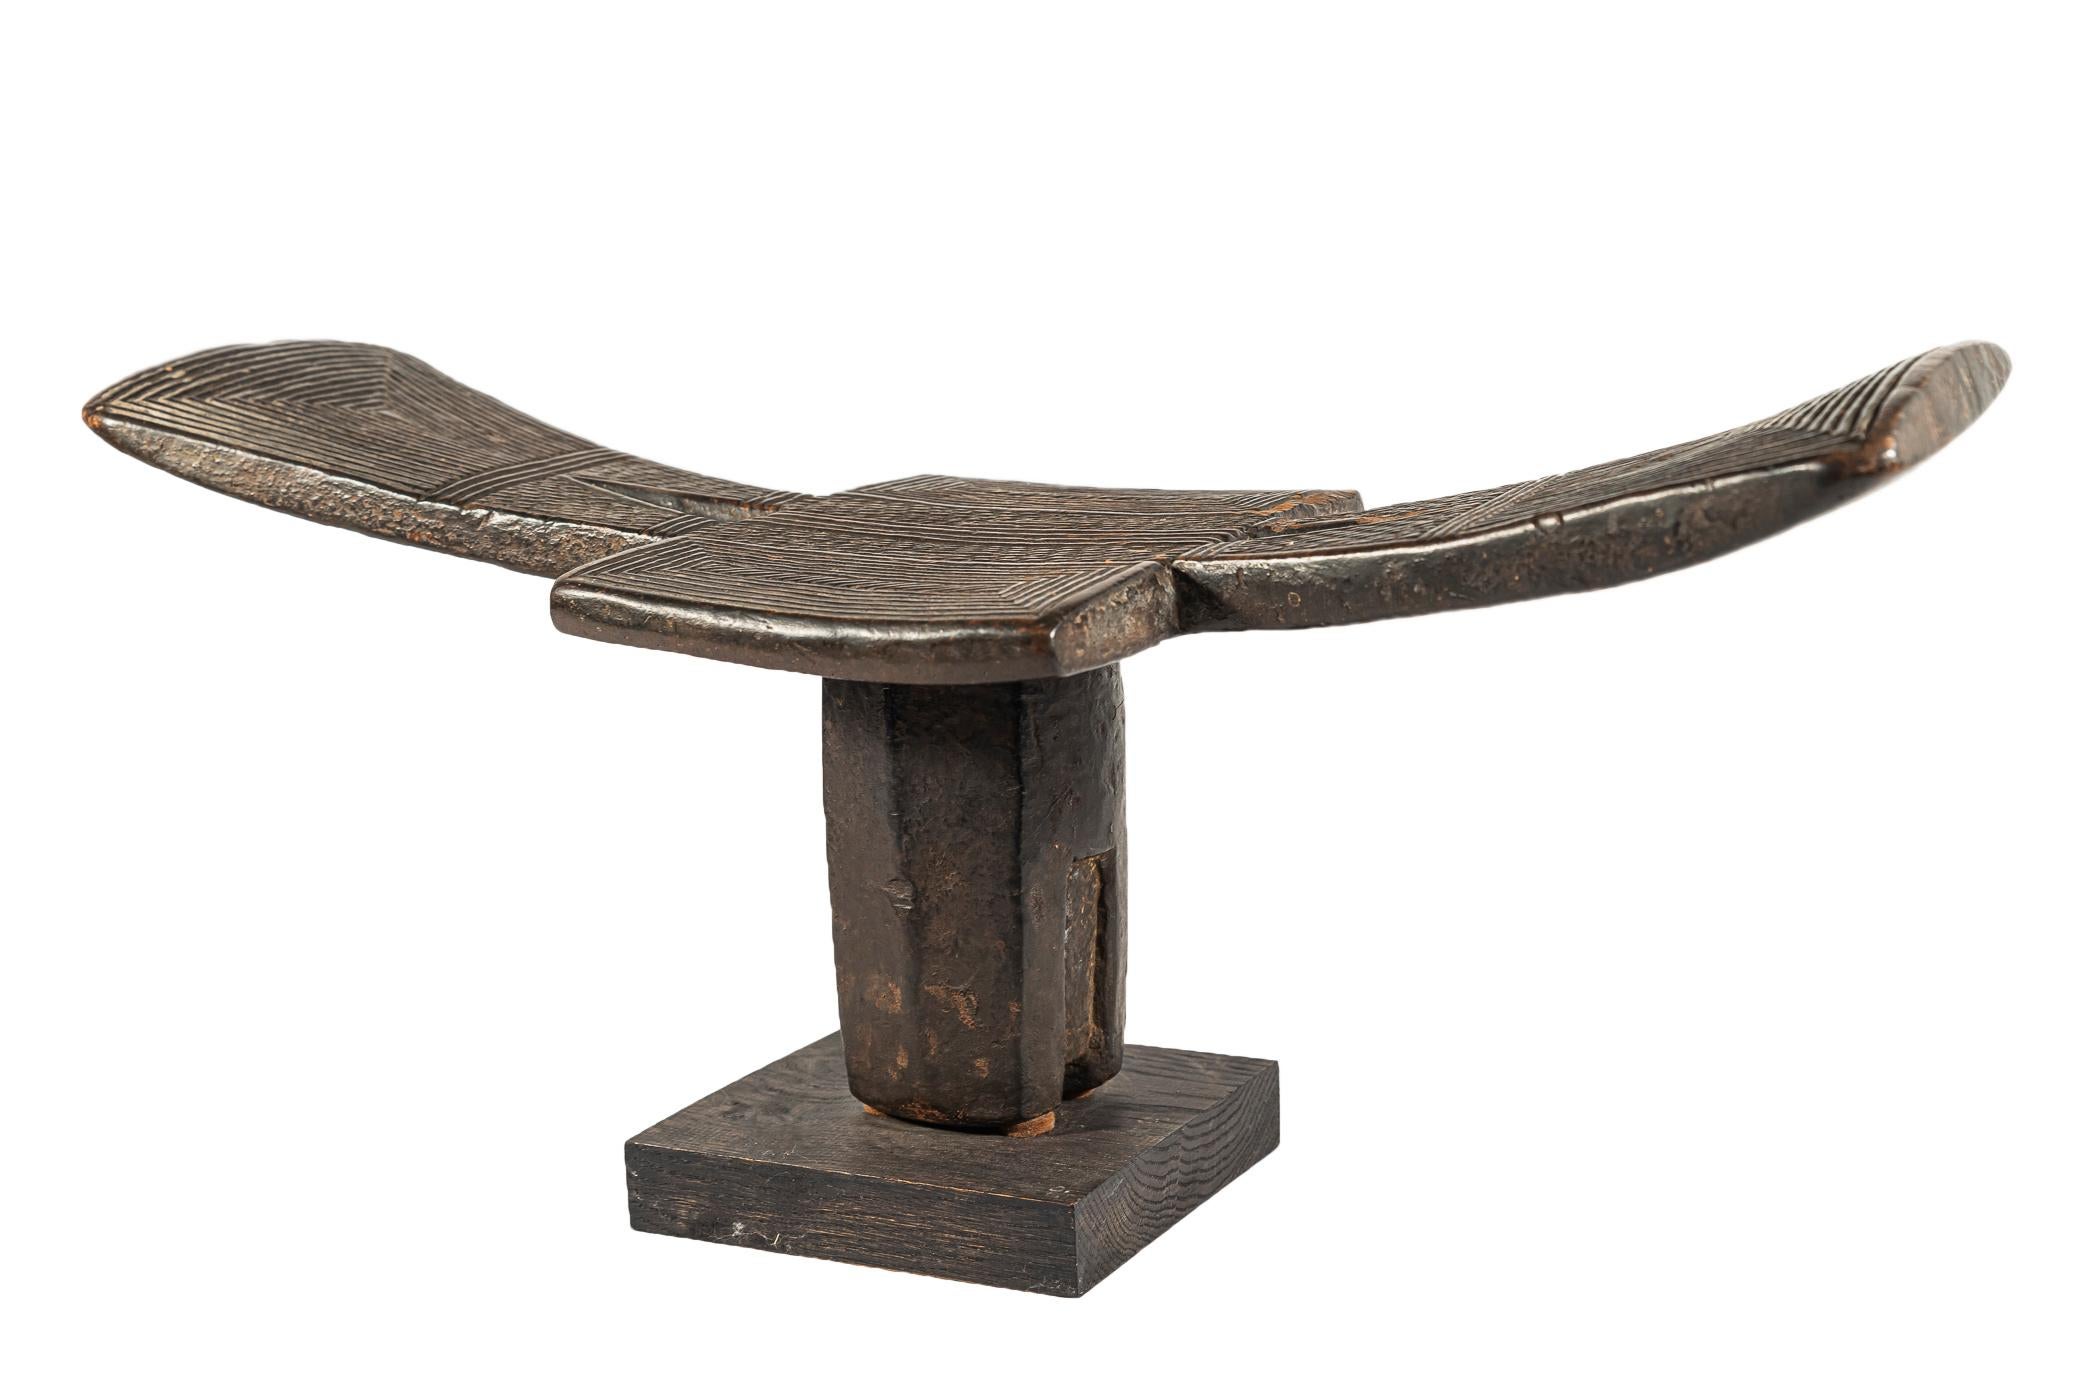 Mongo seating,
Wood with brown patina decorated with geometric incisions,
Democratic Republic of the Congo, early 20th century.

Measures: Height 19 cm, width 58 cm, depth 22 cm.

The Mongo are a population of Central Africa, found in the south of